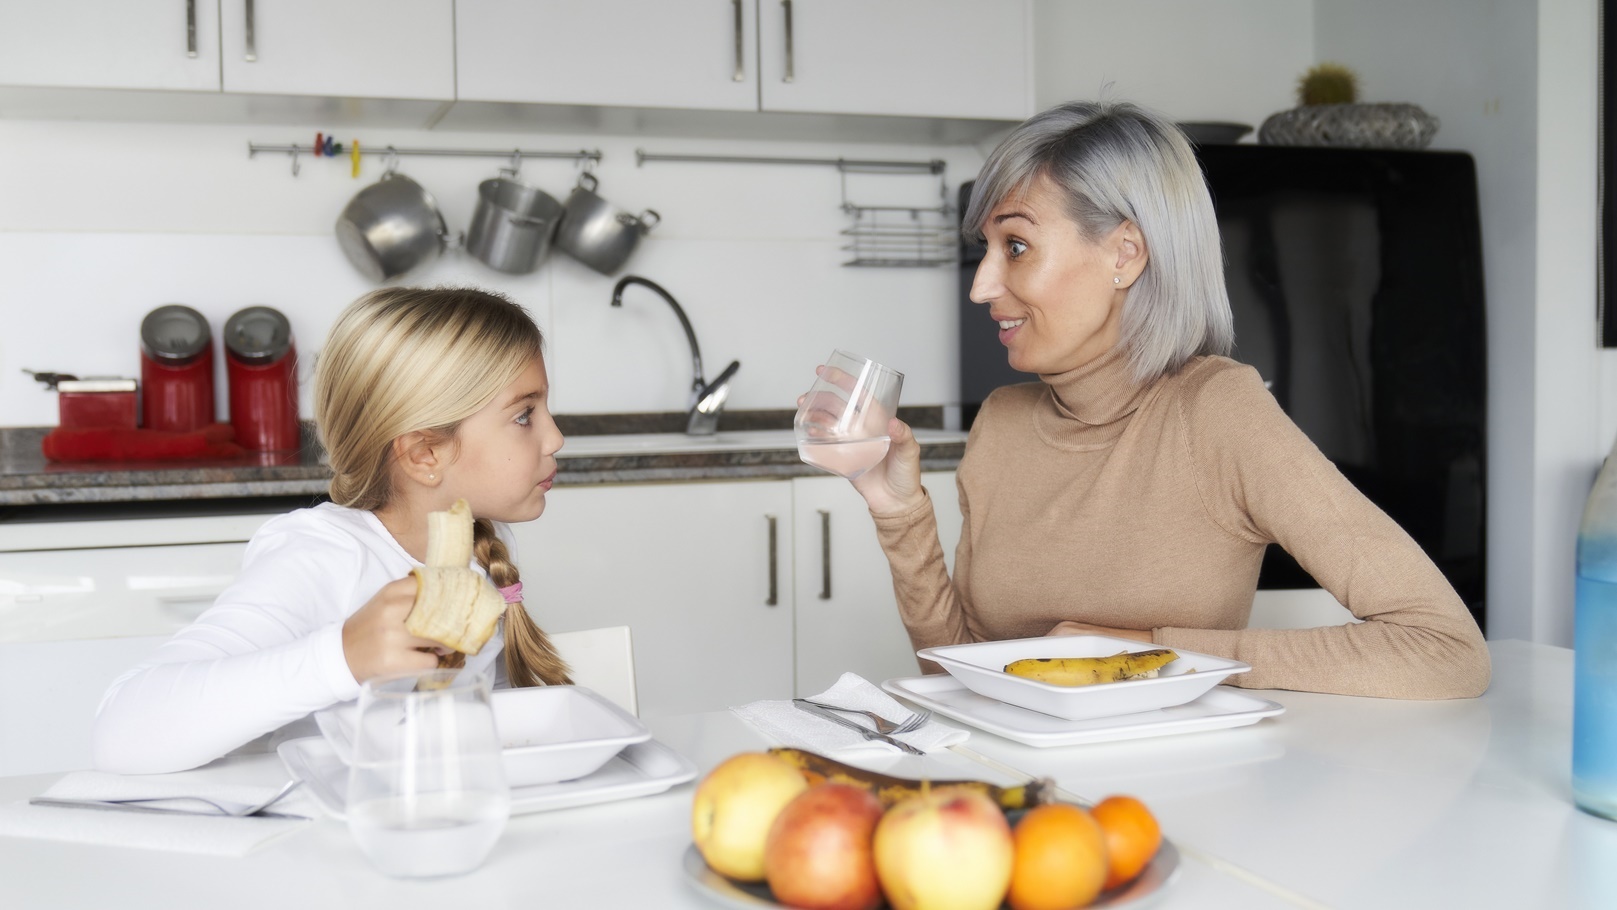 mother-and-daughter-eating-fruit-in-the-kitchen-f-2022-02-16-02-29-17-utc